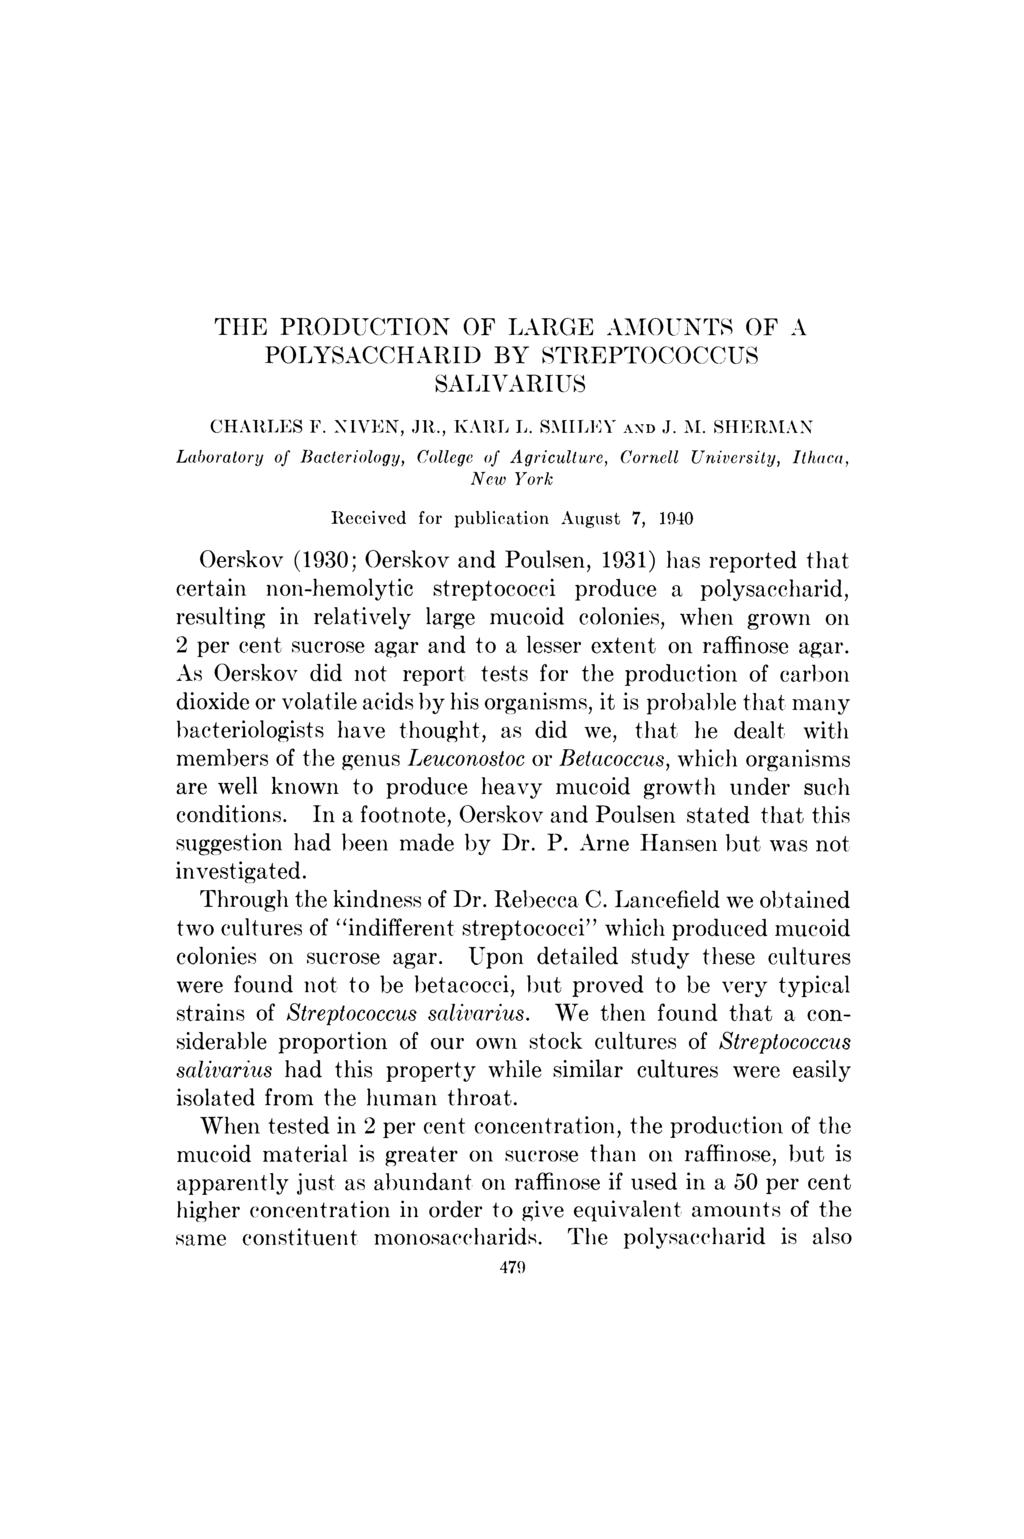 THE PRODUCTION OF LARGE AMXIOtUNTS OF A POLYSACCHARID BY STREPTOCOCCUS SALIVARIUS CHARLES F. NIVEN, JR., KARL L. SMILEY AND J. M.